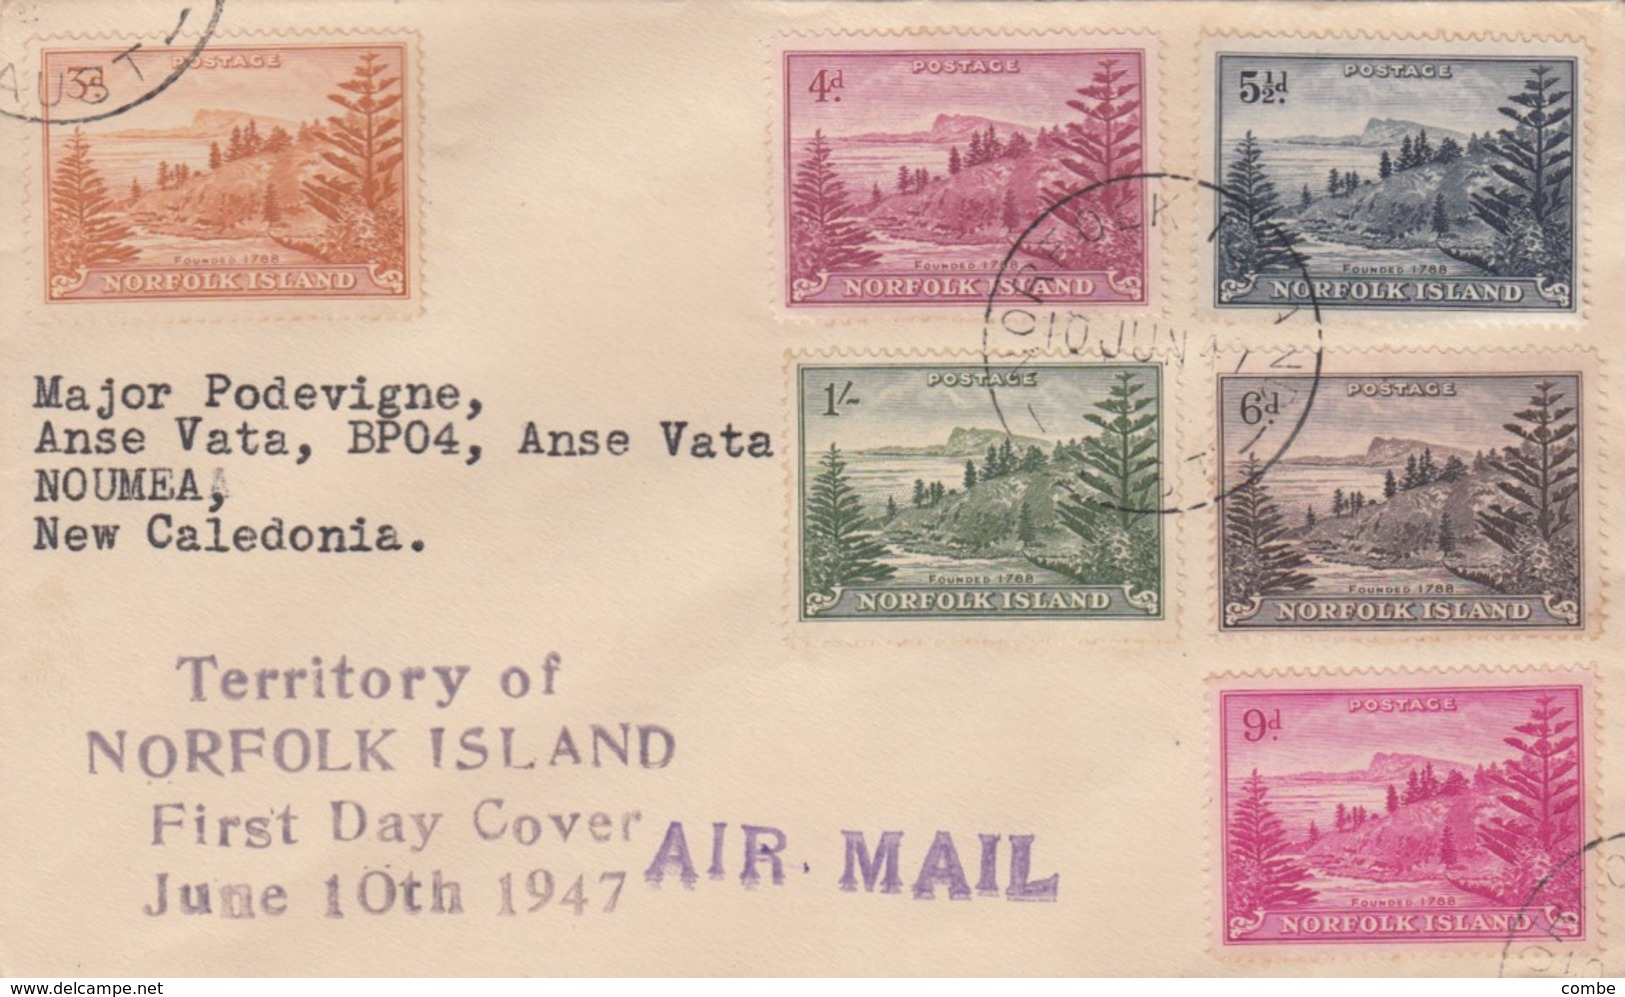 COVER. AIR MAIL. NORFOLK ISLAND. 10 JUN 47. FDC. TO NOUMEA NOUVELLE CALEDONIE - Ile Norfolk